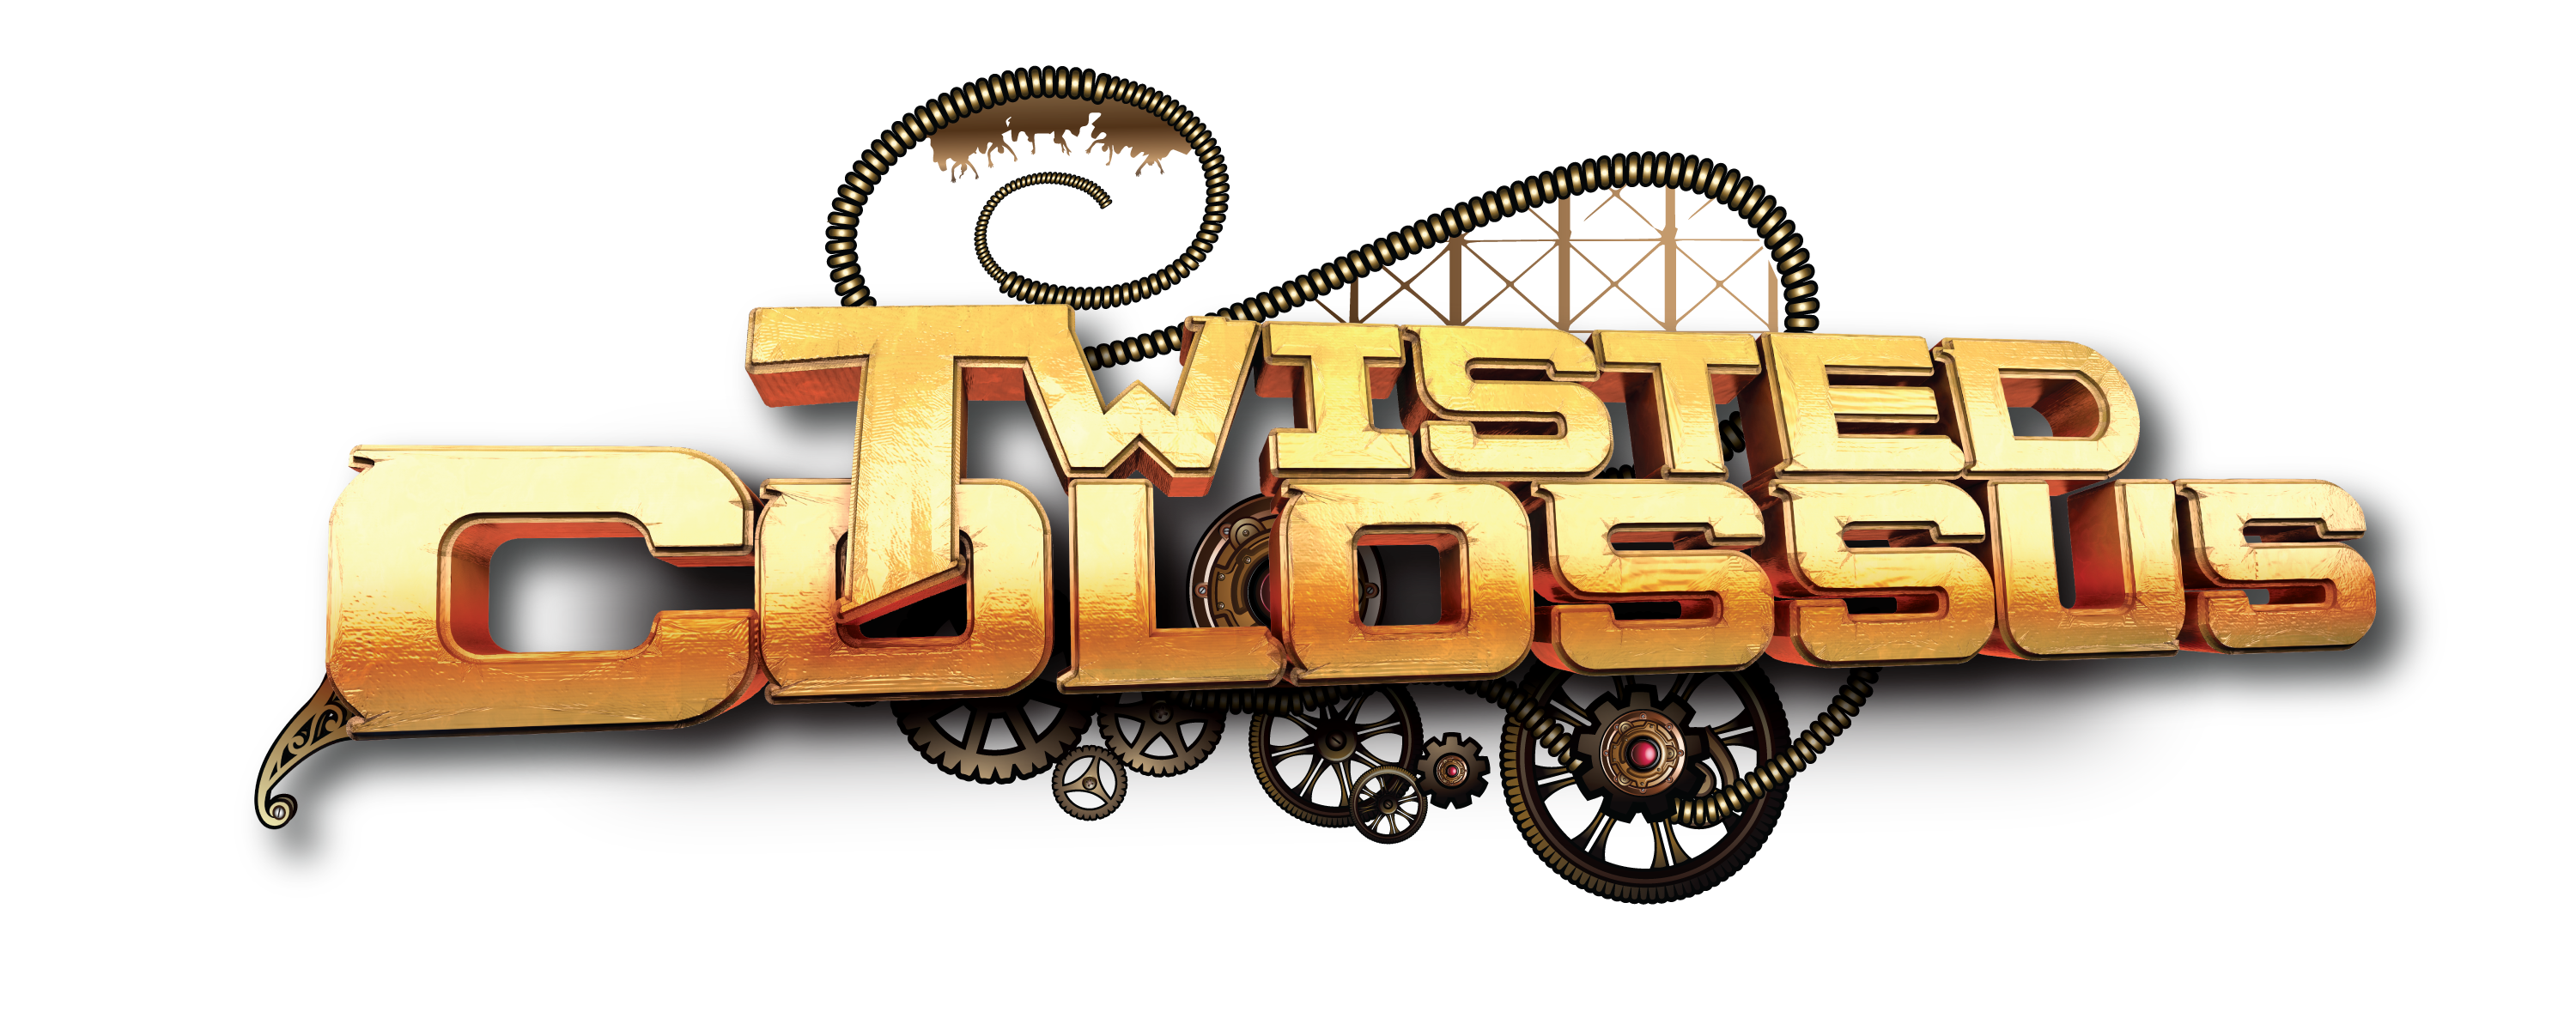 Twistedcolossuslogowhite.png - Six Flags, Transparent background PNG HD thumbnail